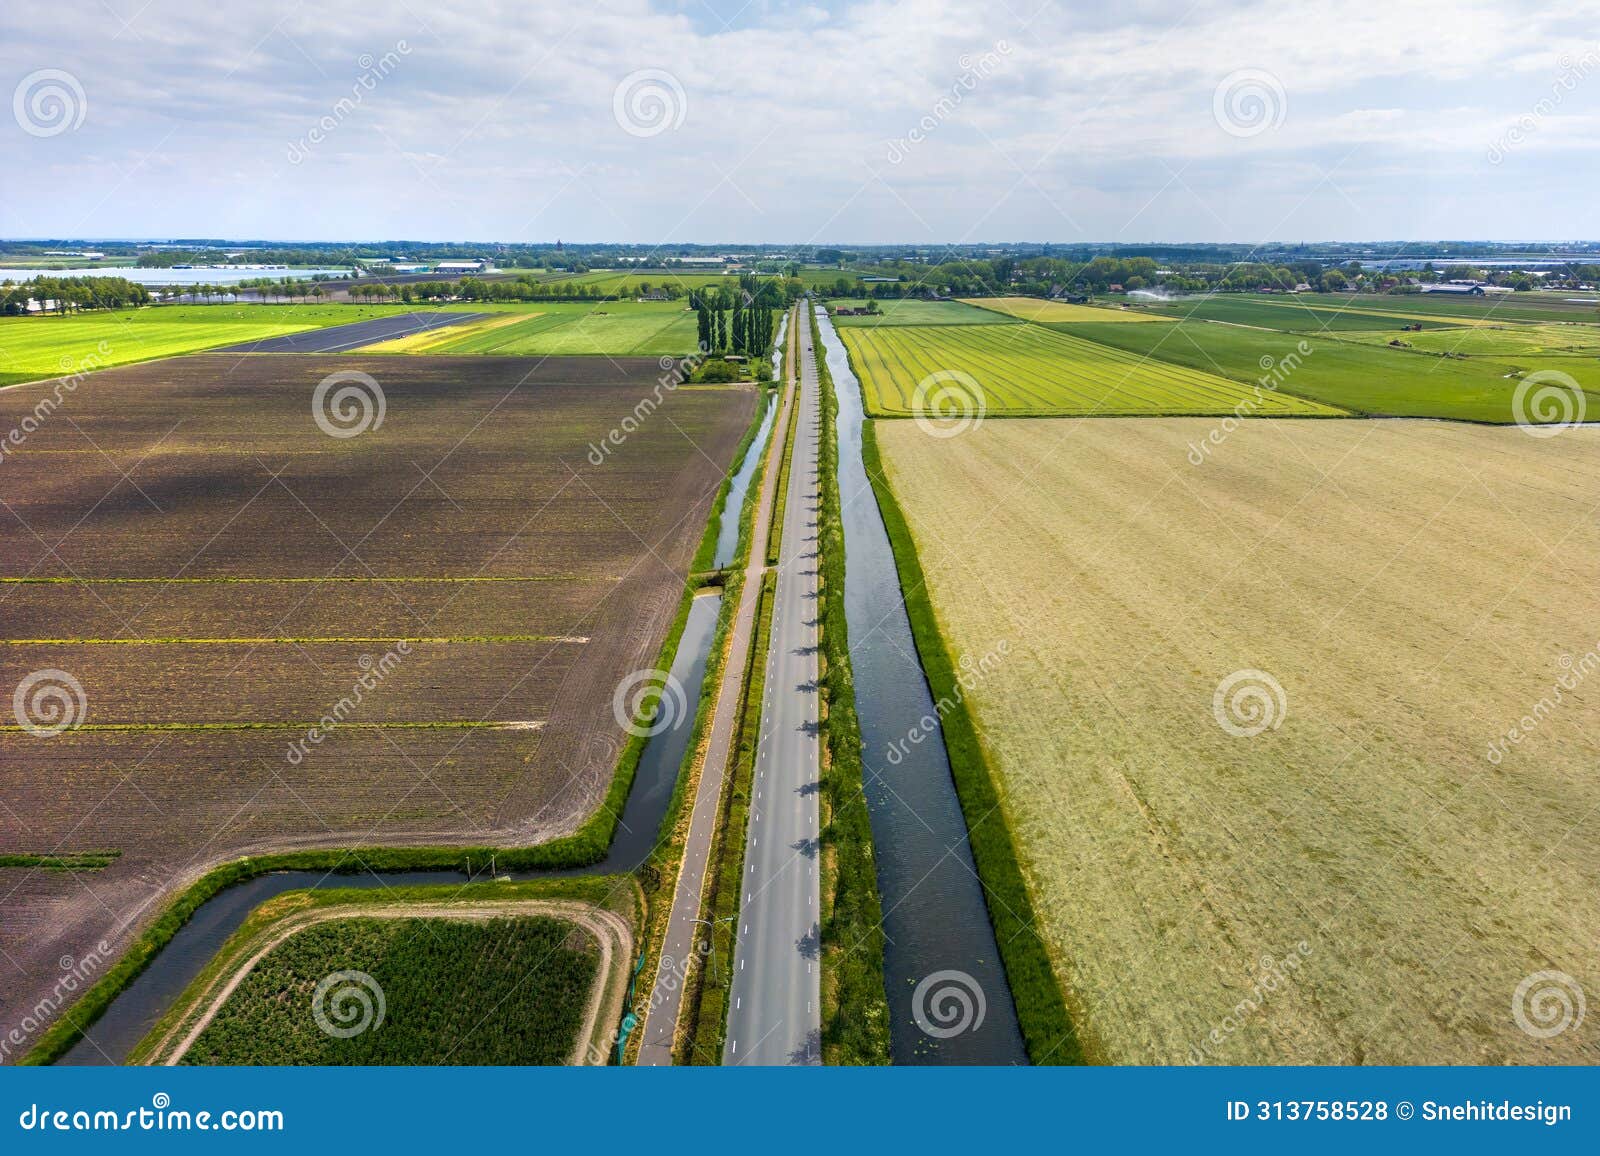 aerial view of wide open farm lands and canals in the netherlands